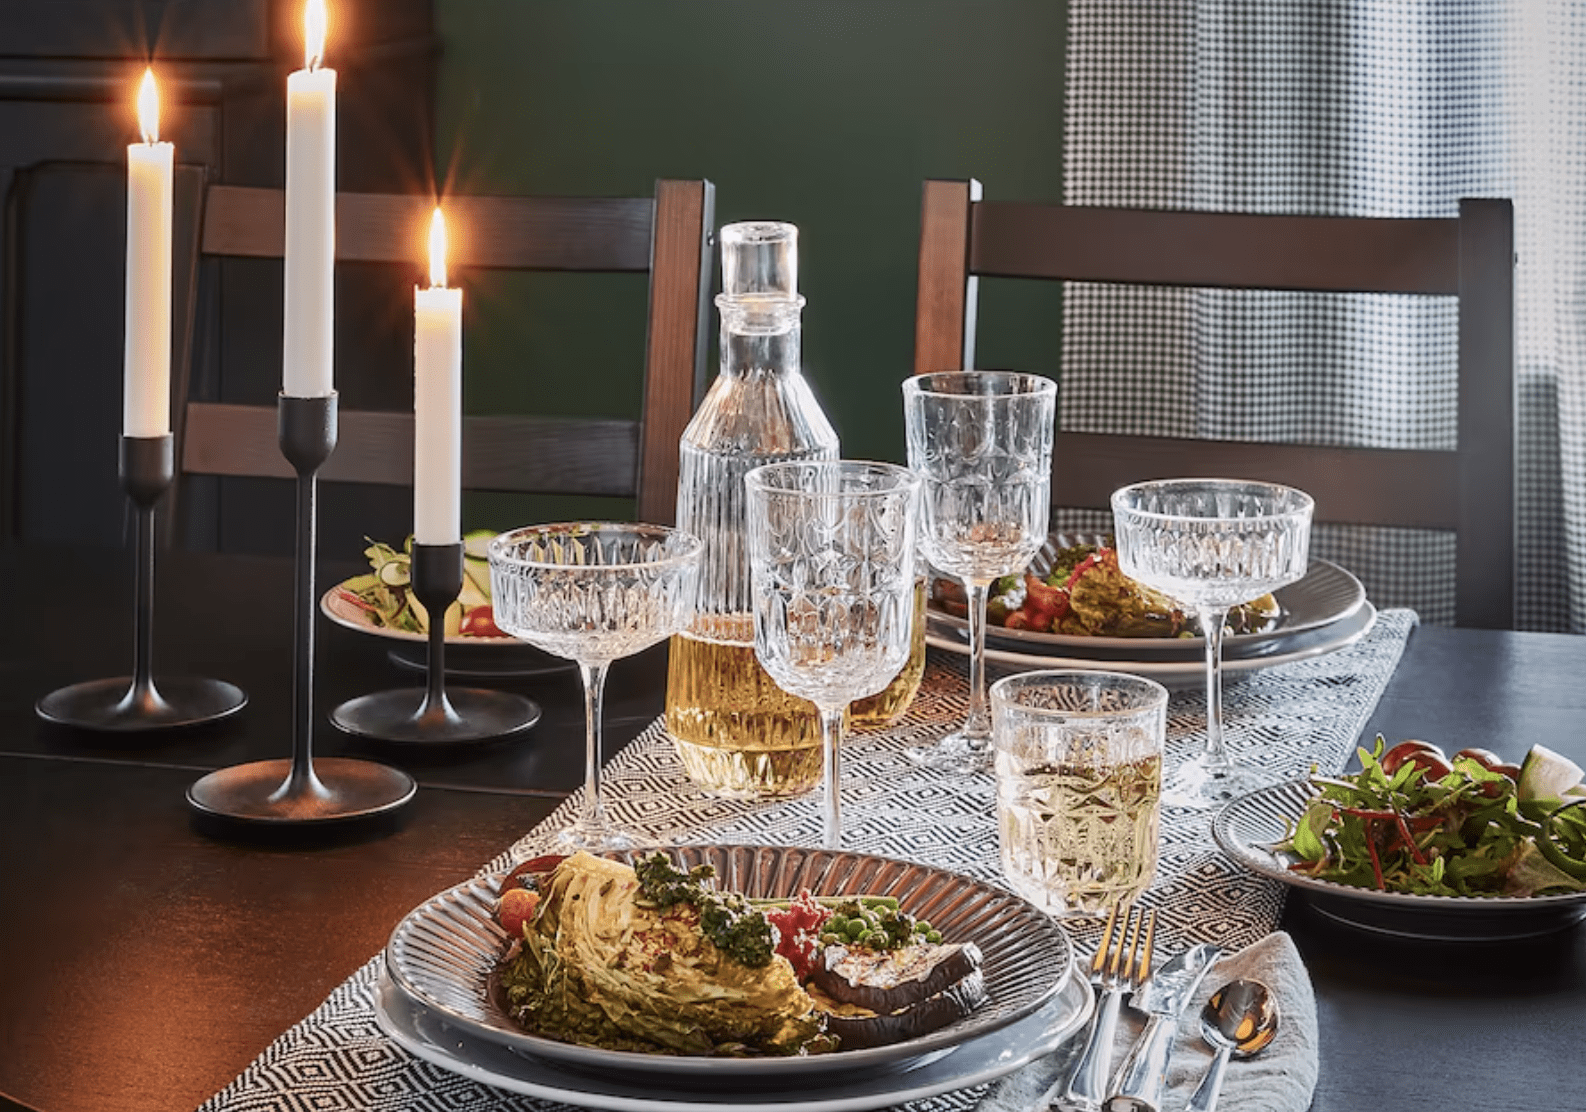 https://cdn.apartmenttherapy.info/image/upload/v1650474786/at/style/2022-04/Fancy%20Glasses%20Under%20%2420/IKEA%20Glassware%20Tablescape.png